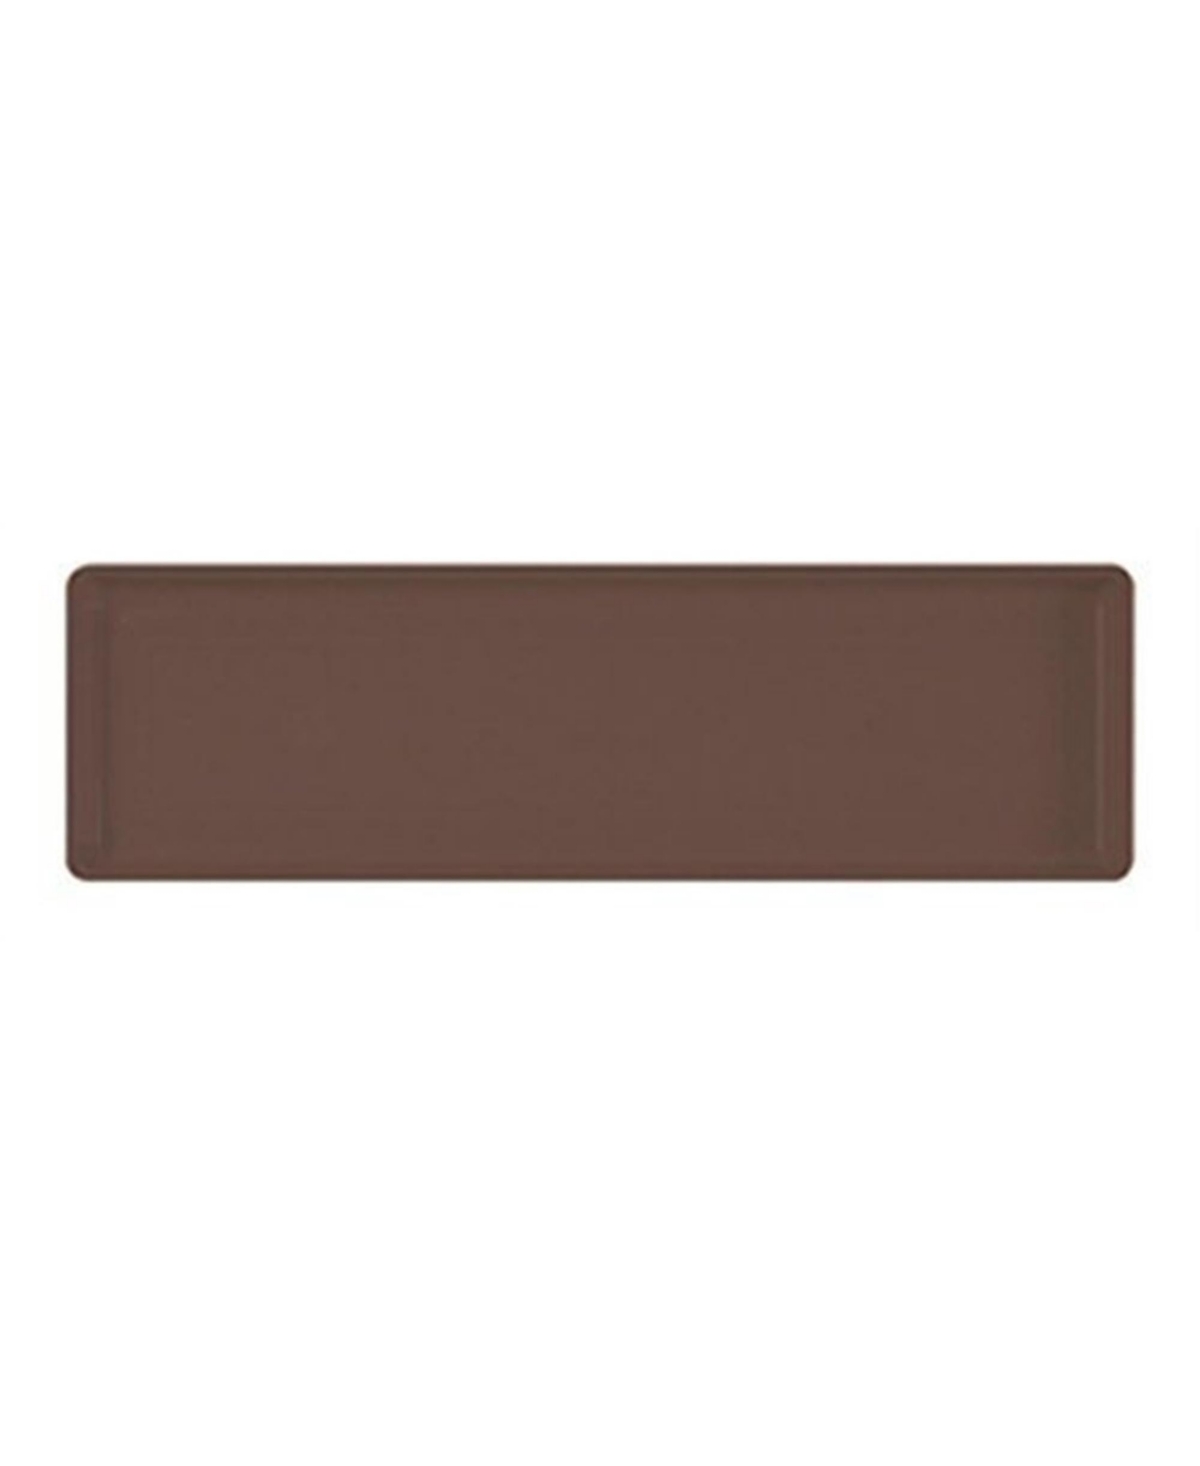 Countryside Flower Box Tray, Brown- 24" - Brown